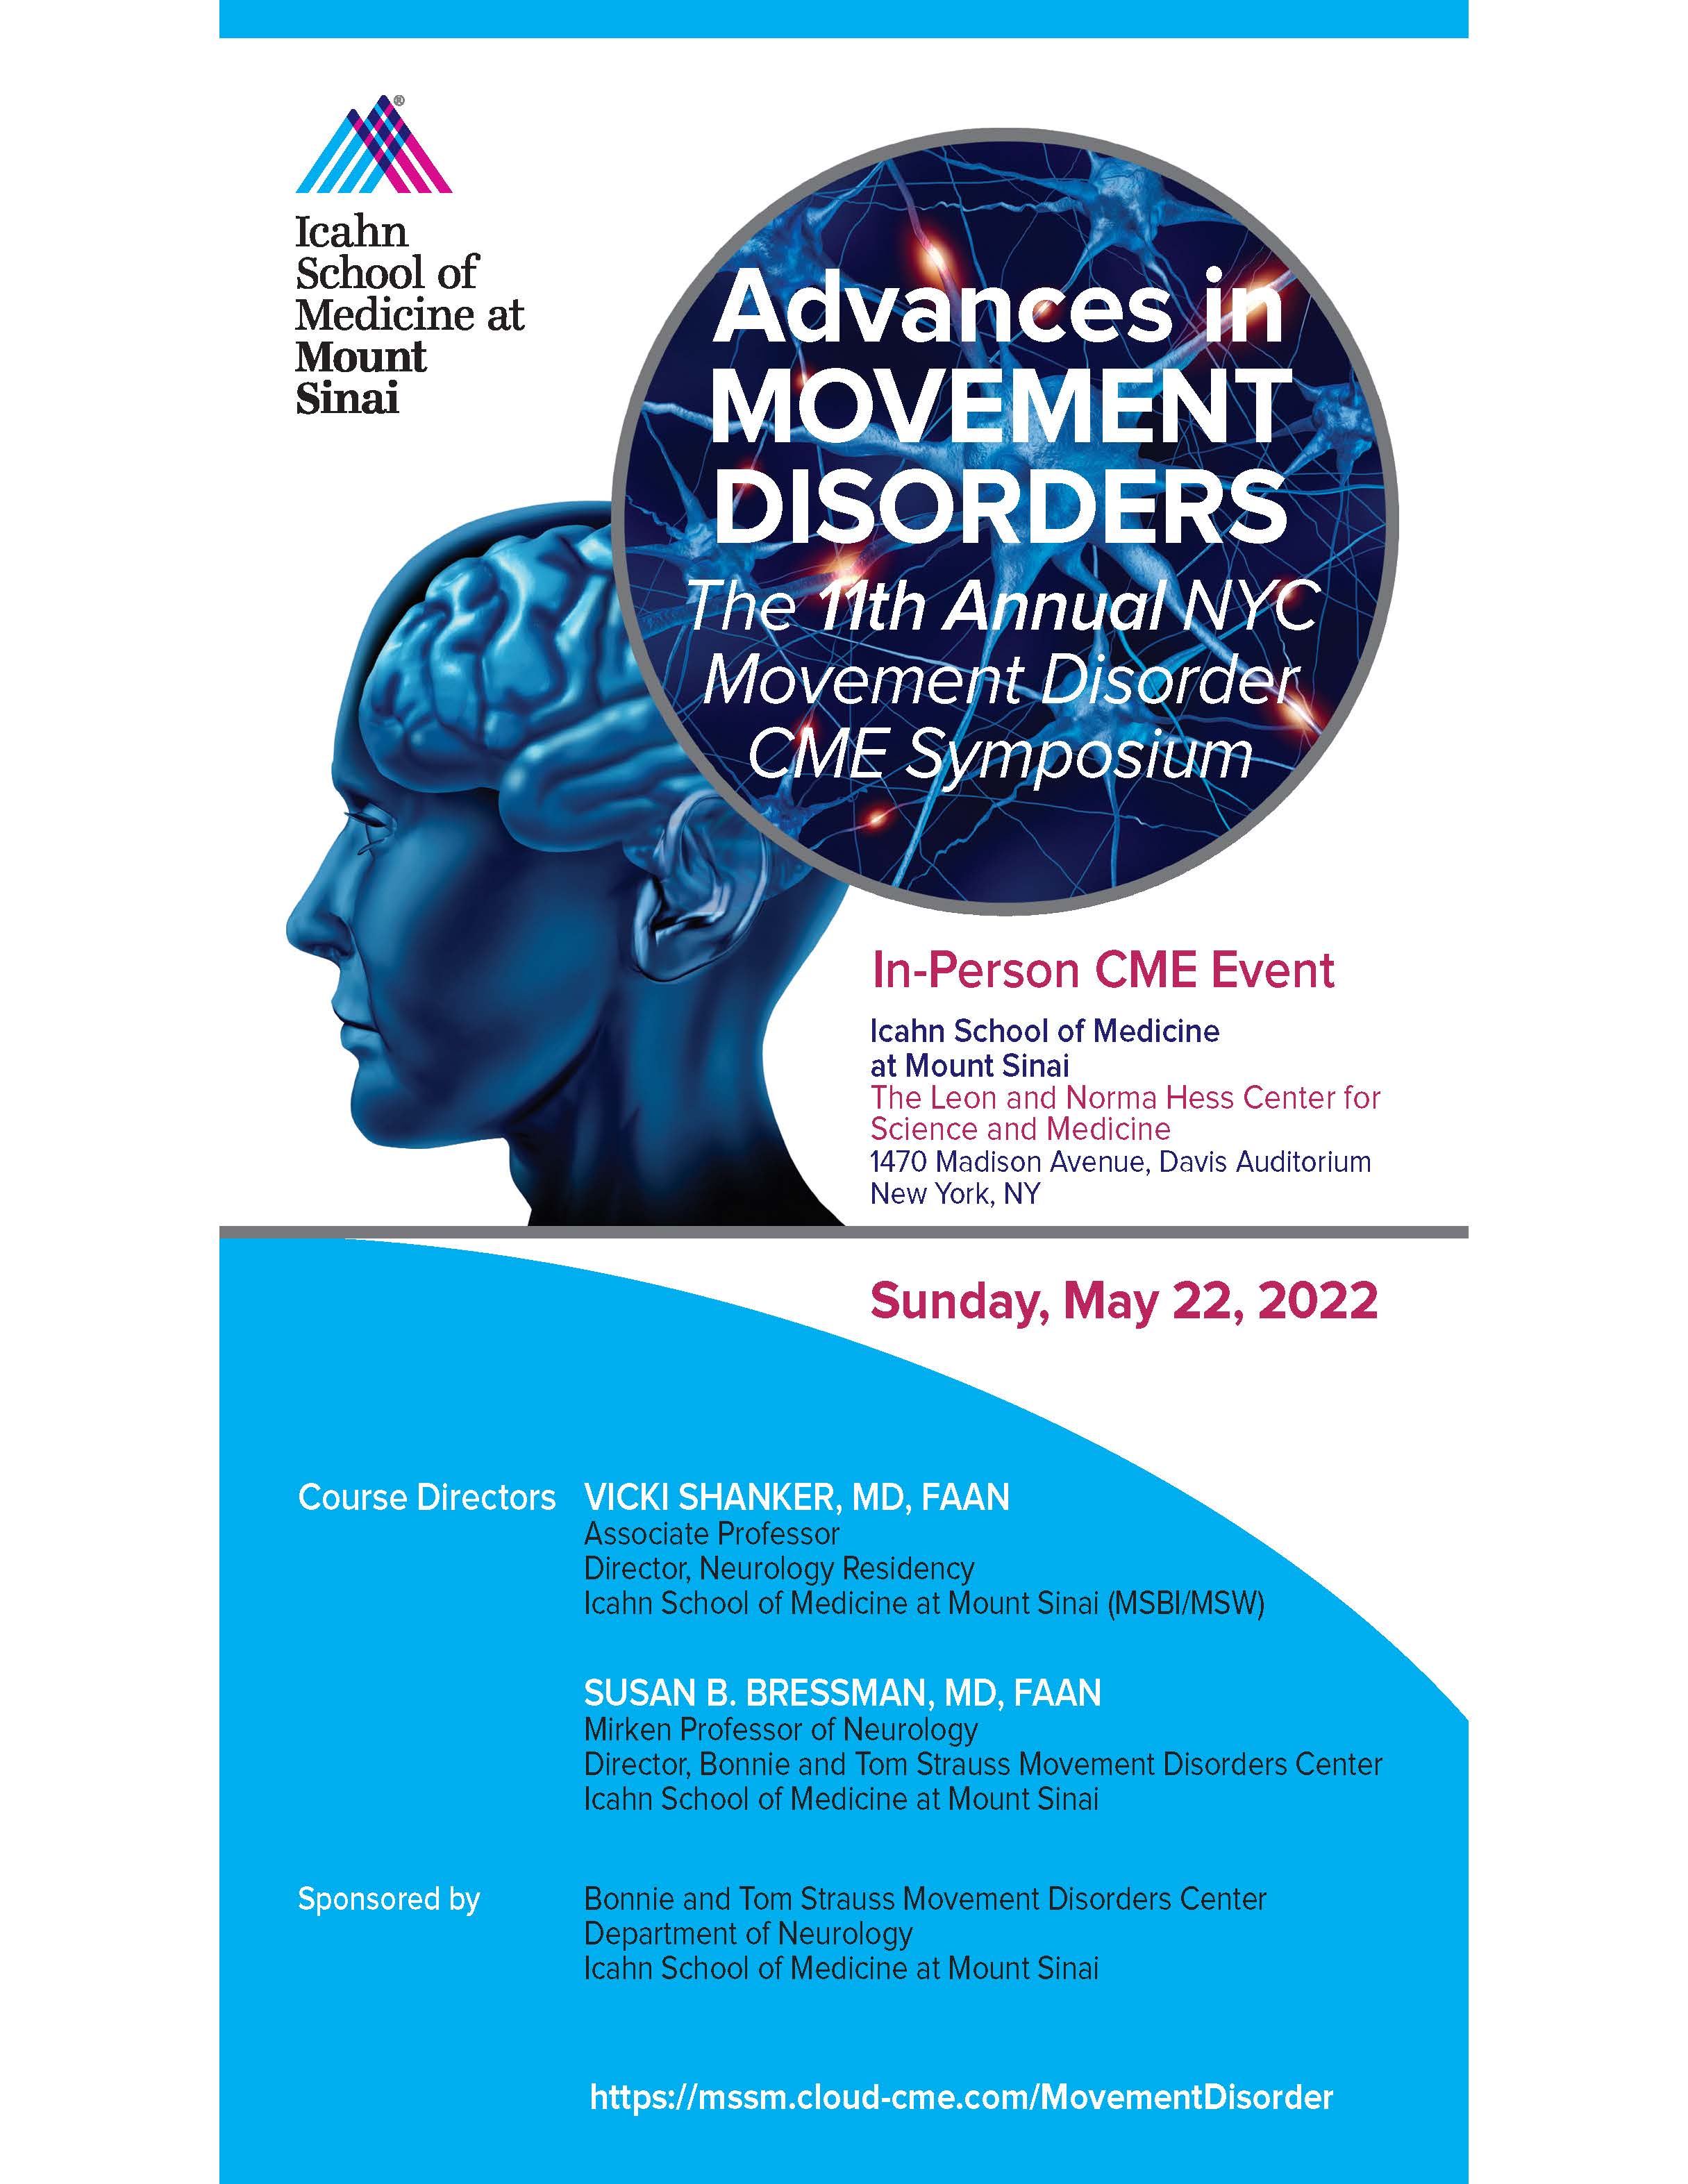 Advances in Movement Disorders: The 11th Annual NYC Movement Disorder CME Symposium Banner